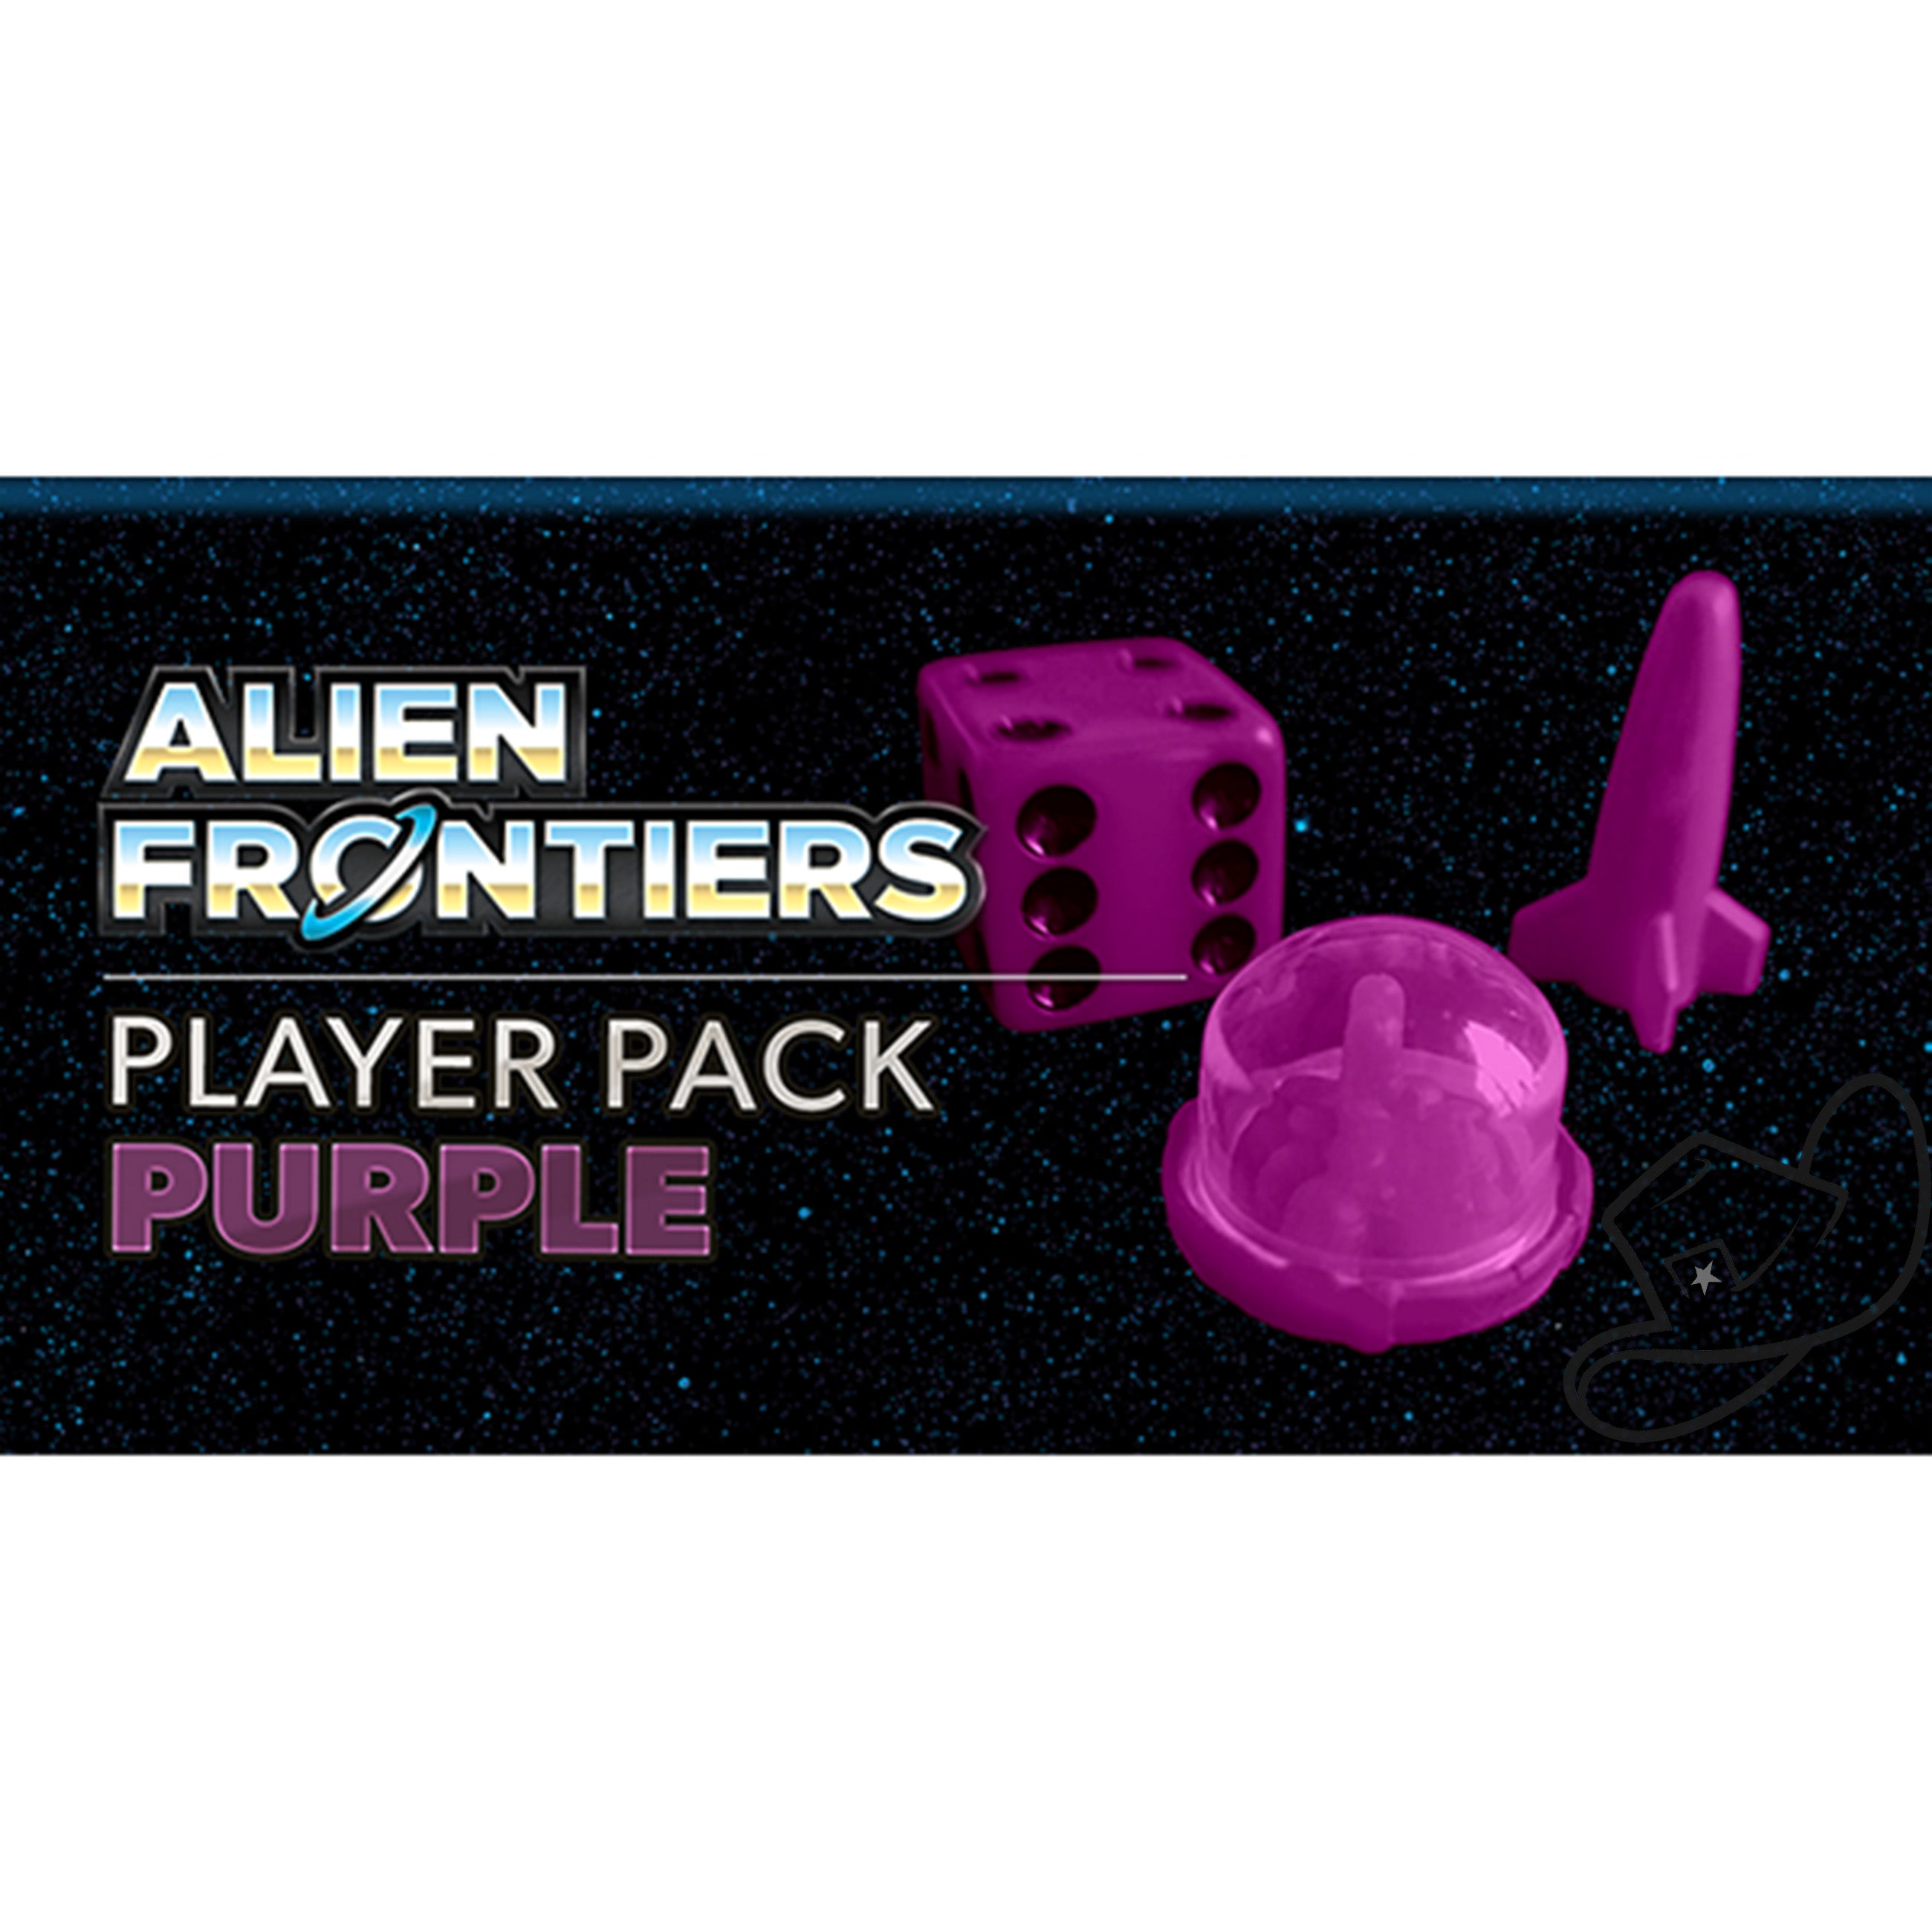 Alien frontiers players pack purple contains all the pieces needed to add a new player